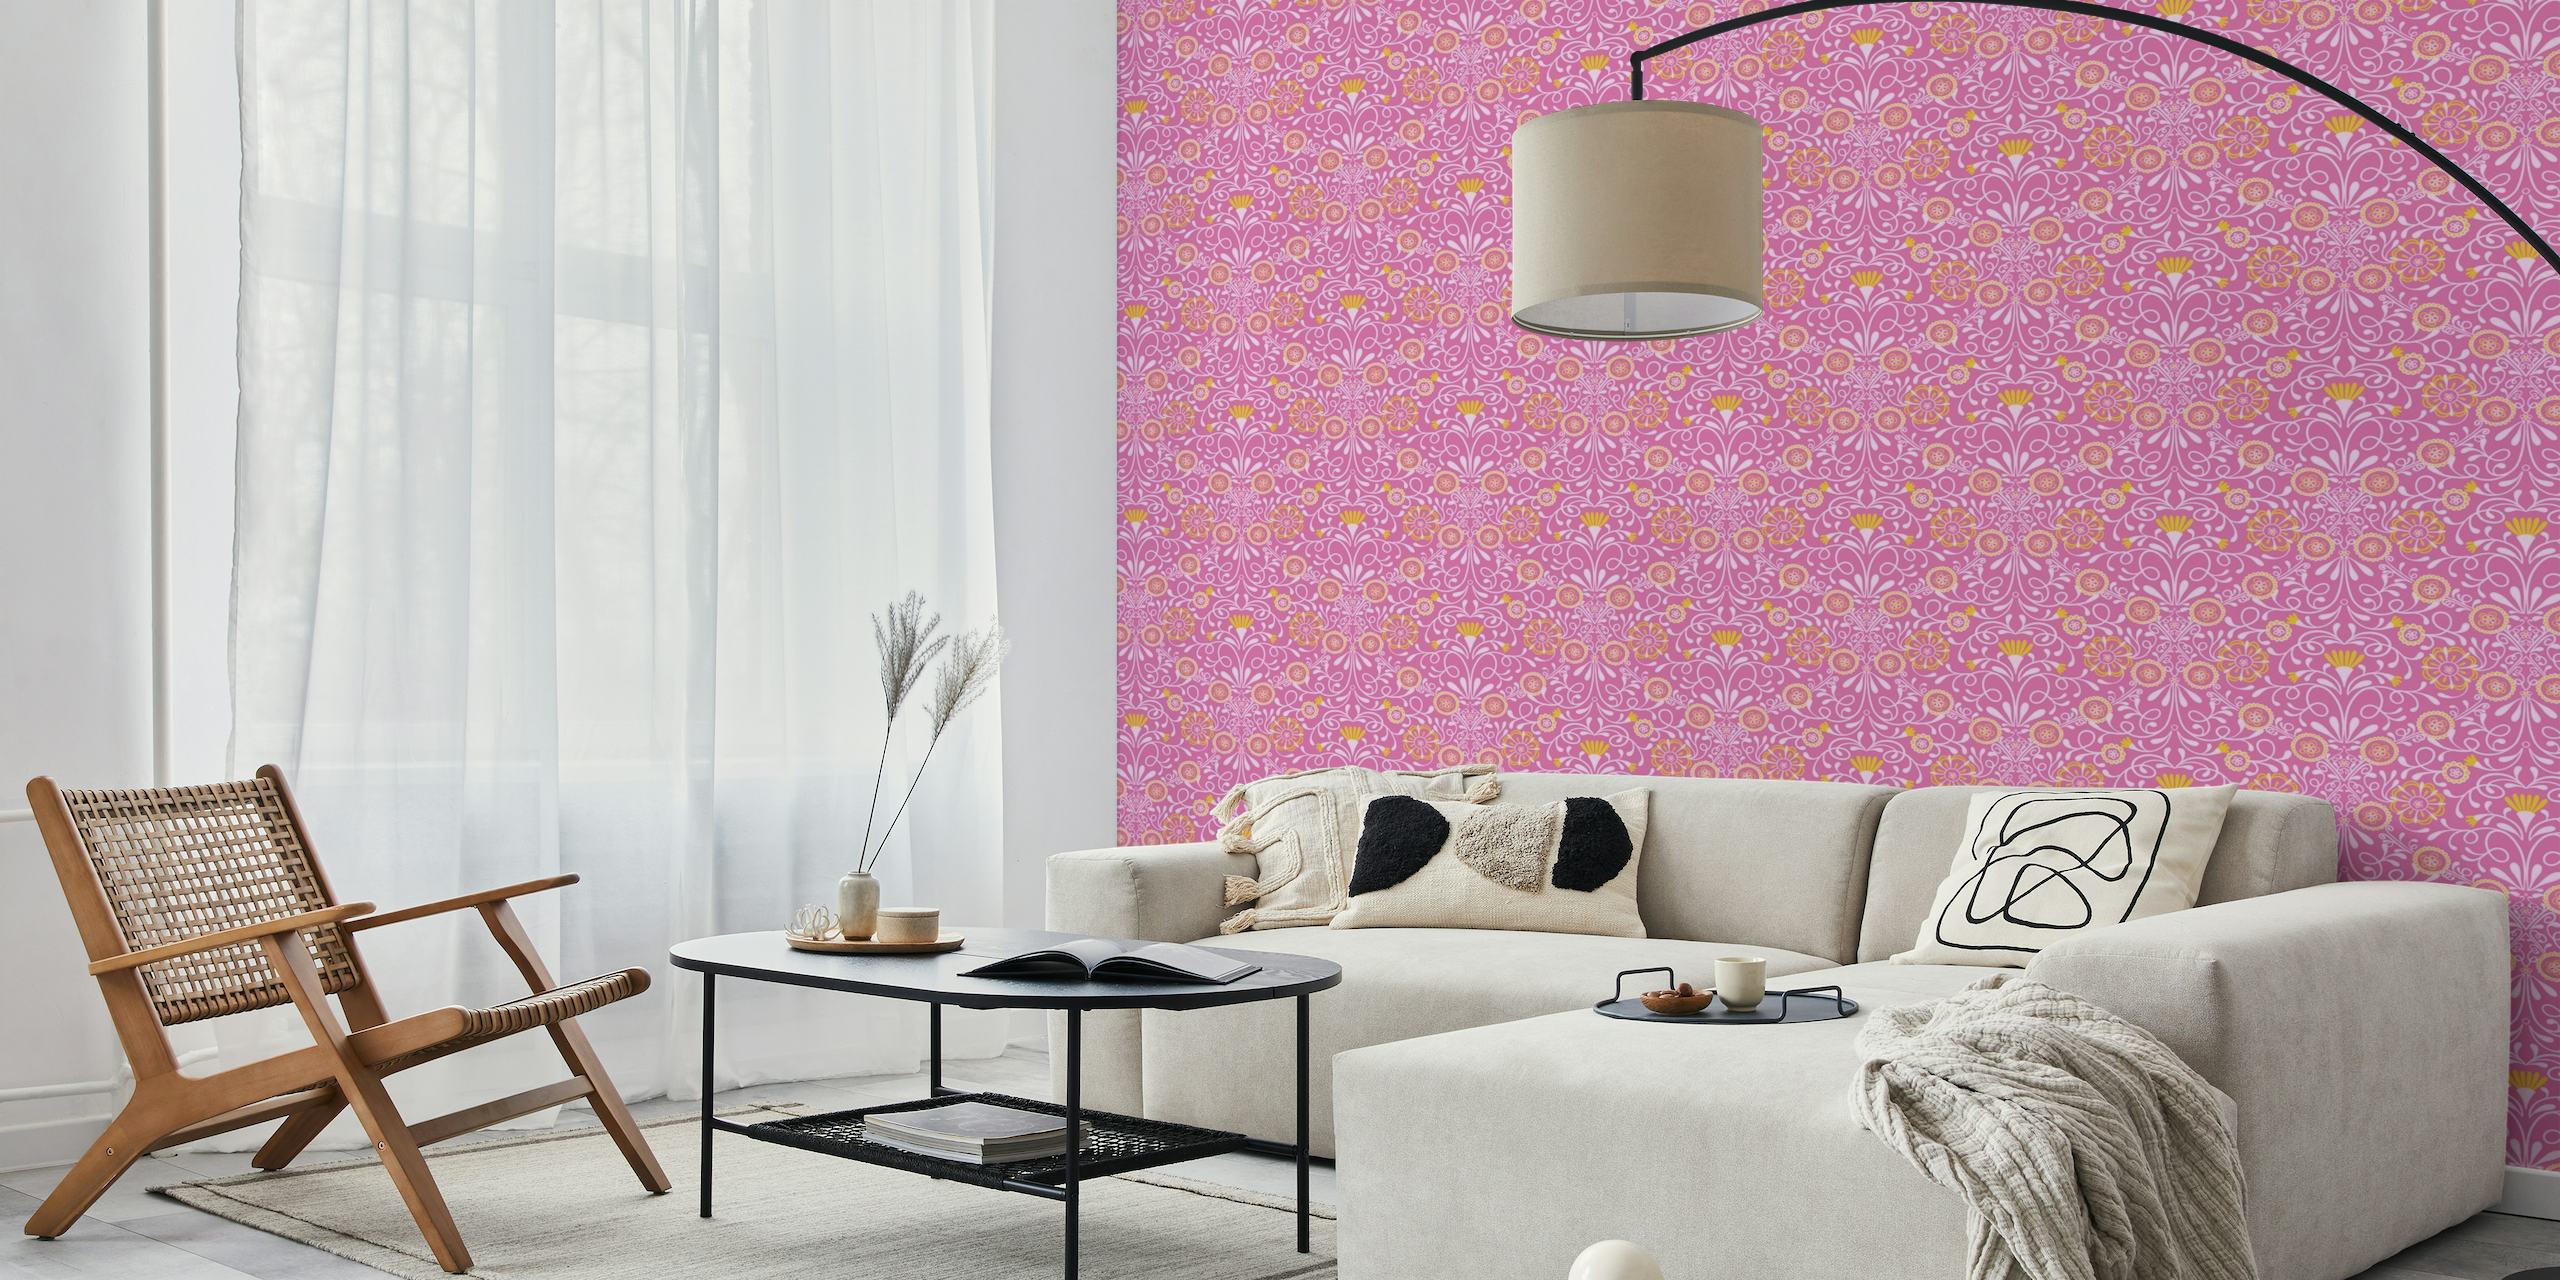 Tuscan Tile in Pink and Yellow tapetit